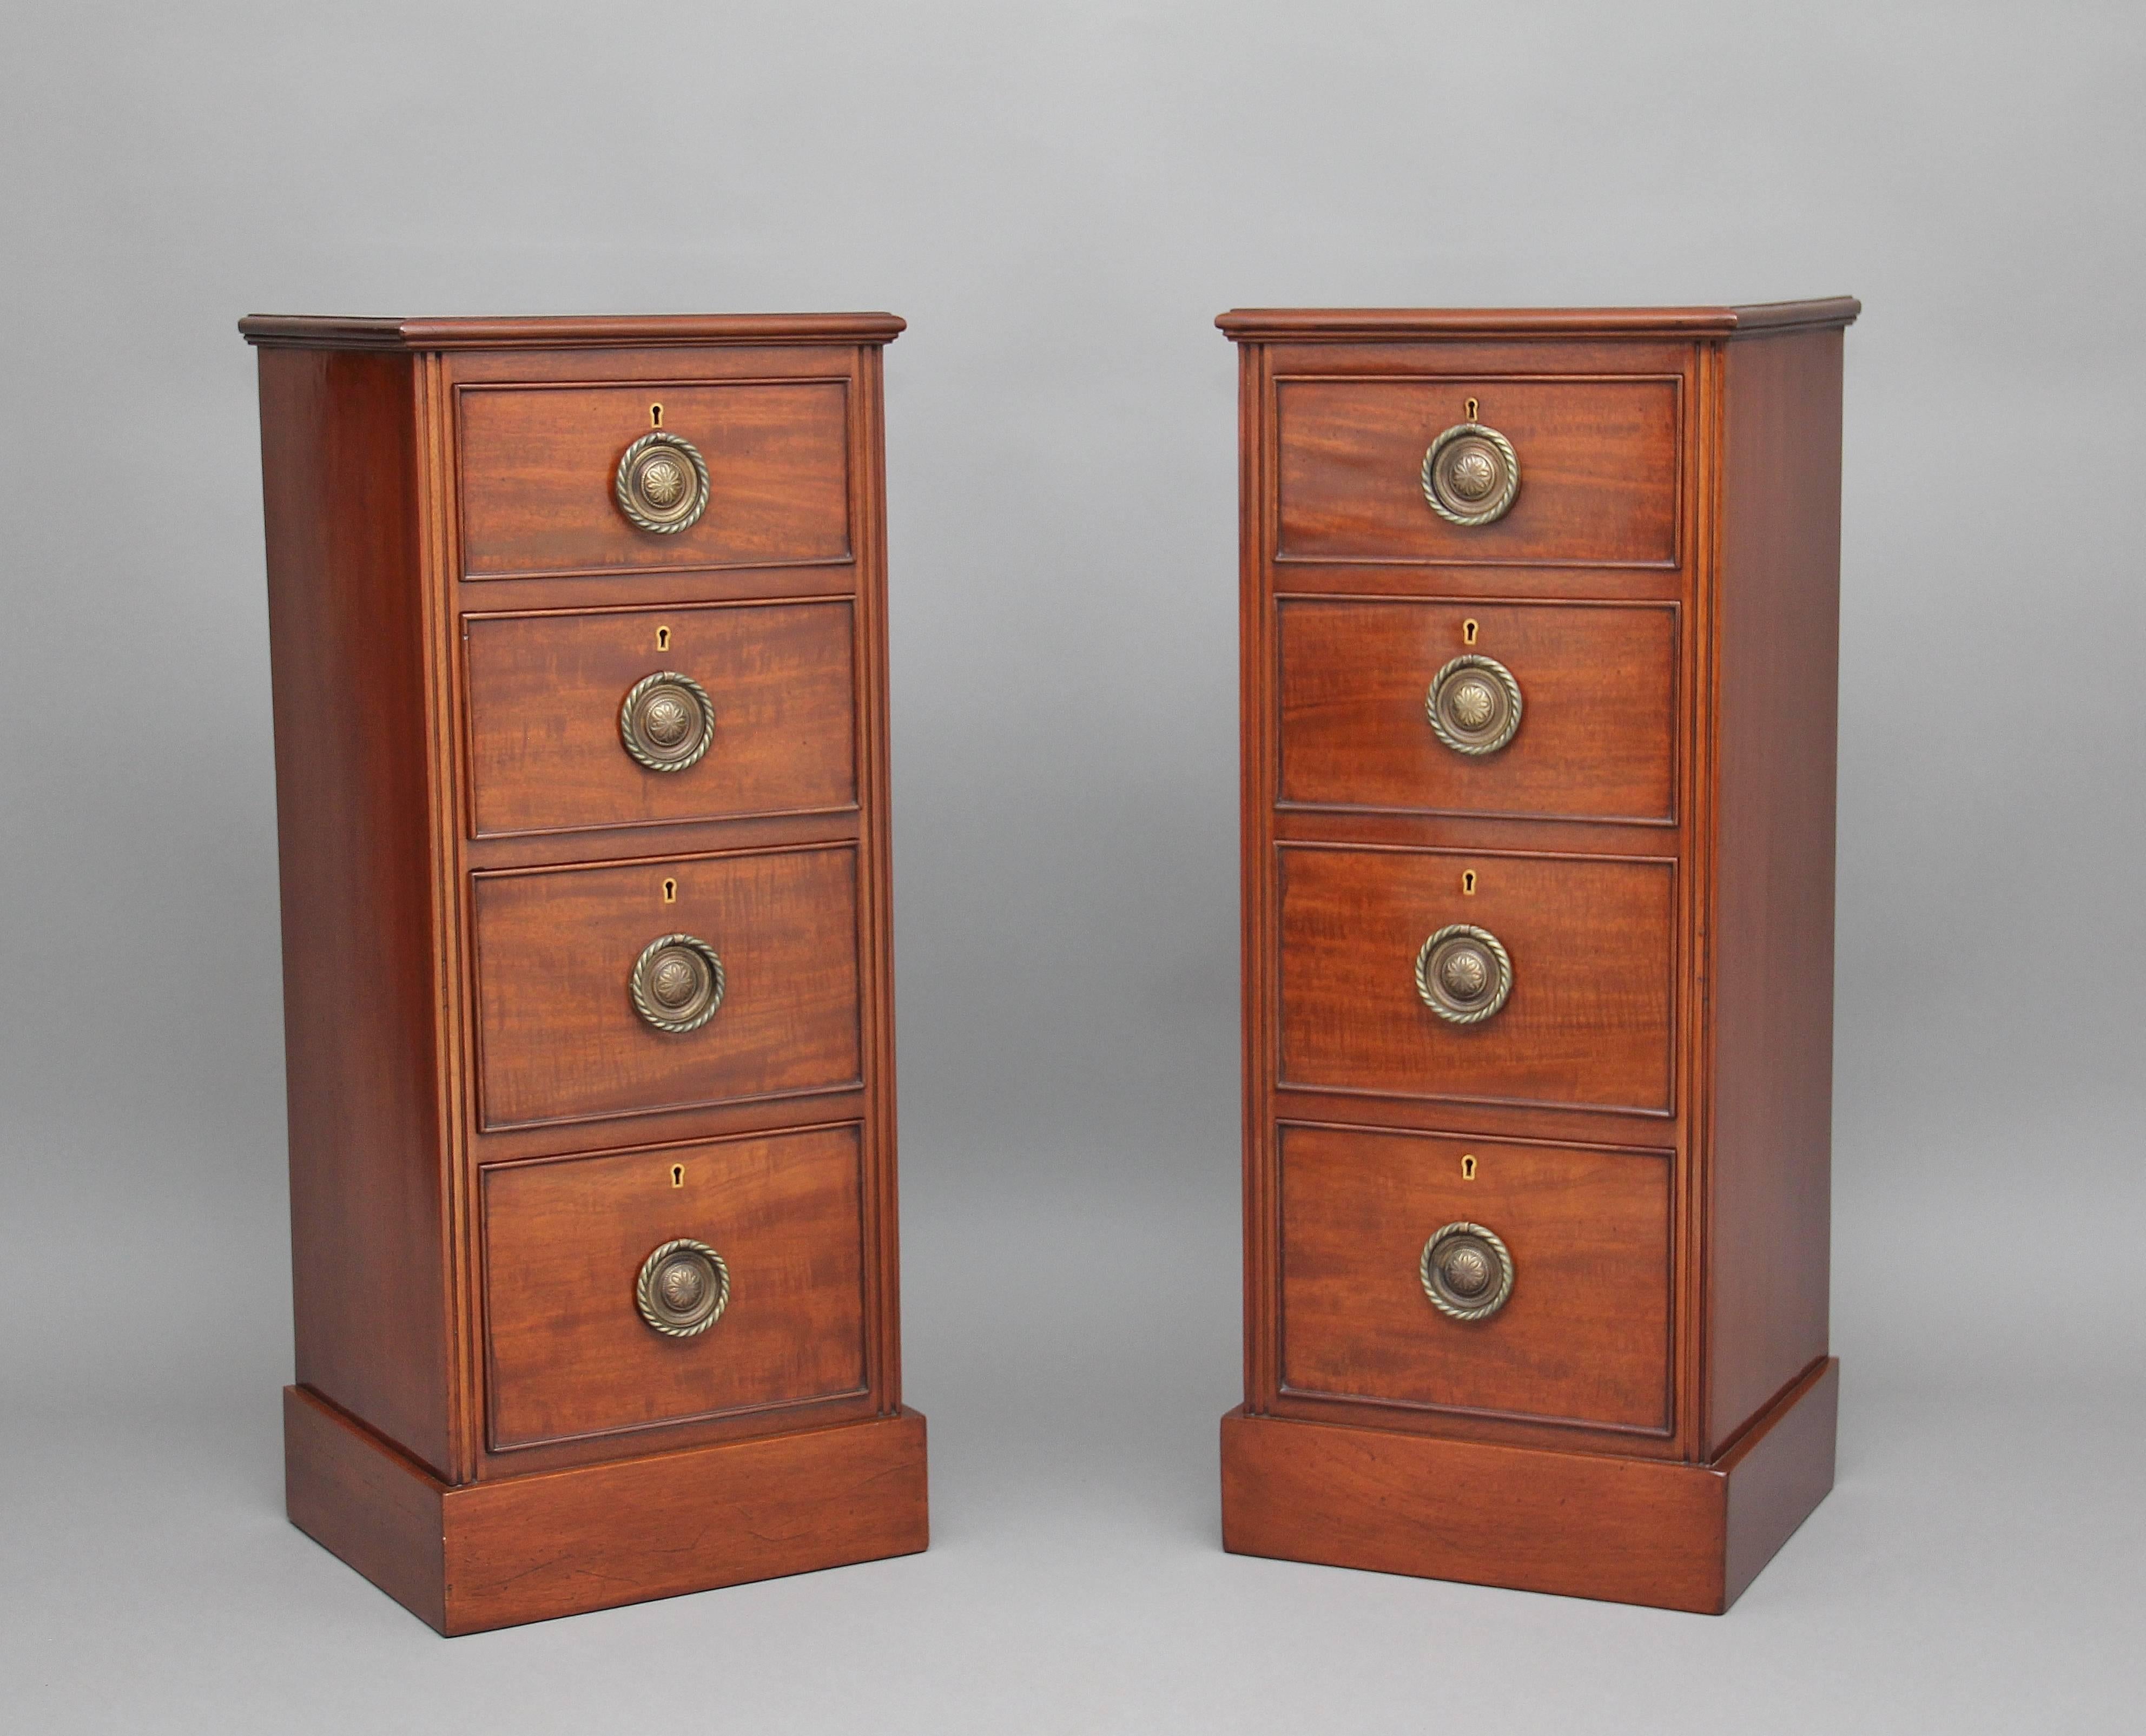 A nice pair of early 20th century mahogany bedside chest’s, with a moulded edge top, with reeded decoration running down on either side of the chest fronts, each chest having four oak lined graduated drawers with brass ring handles, standing on a